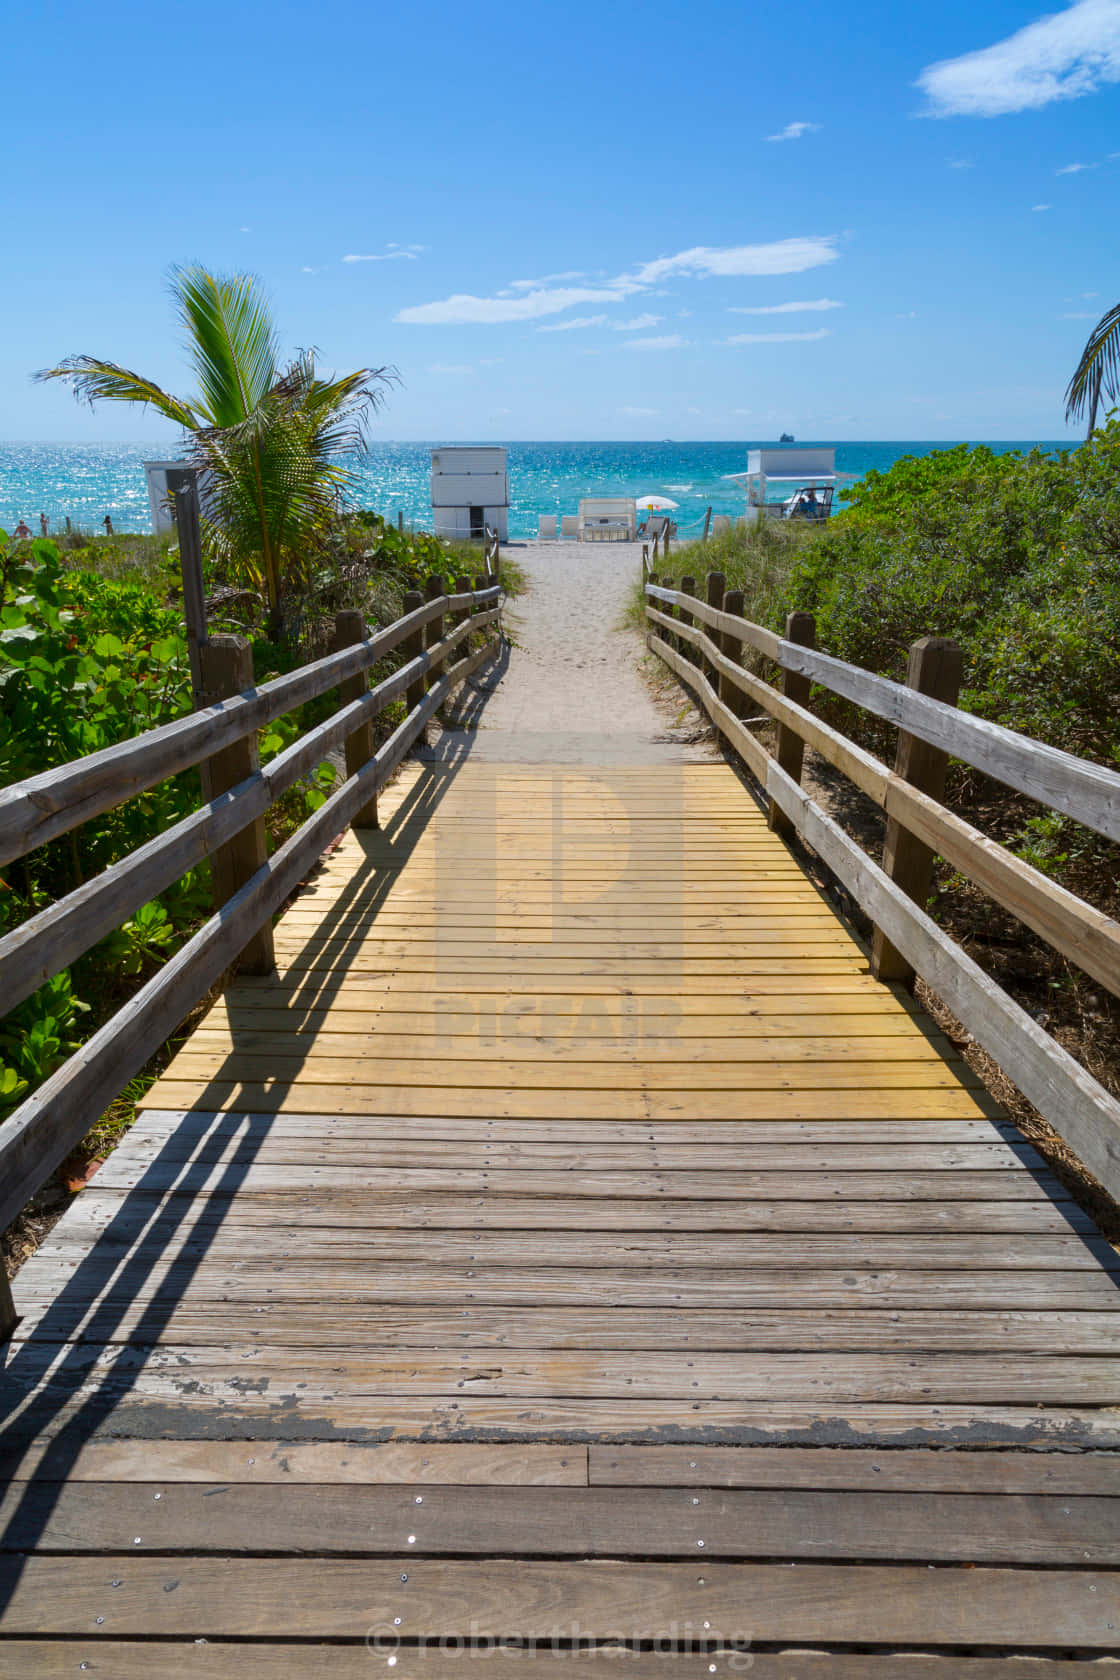 A Wooden Walkway Leading To The Beach